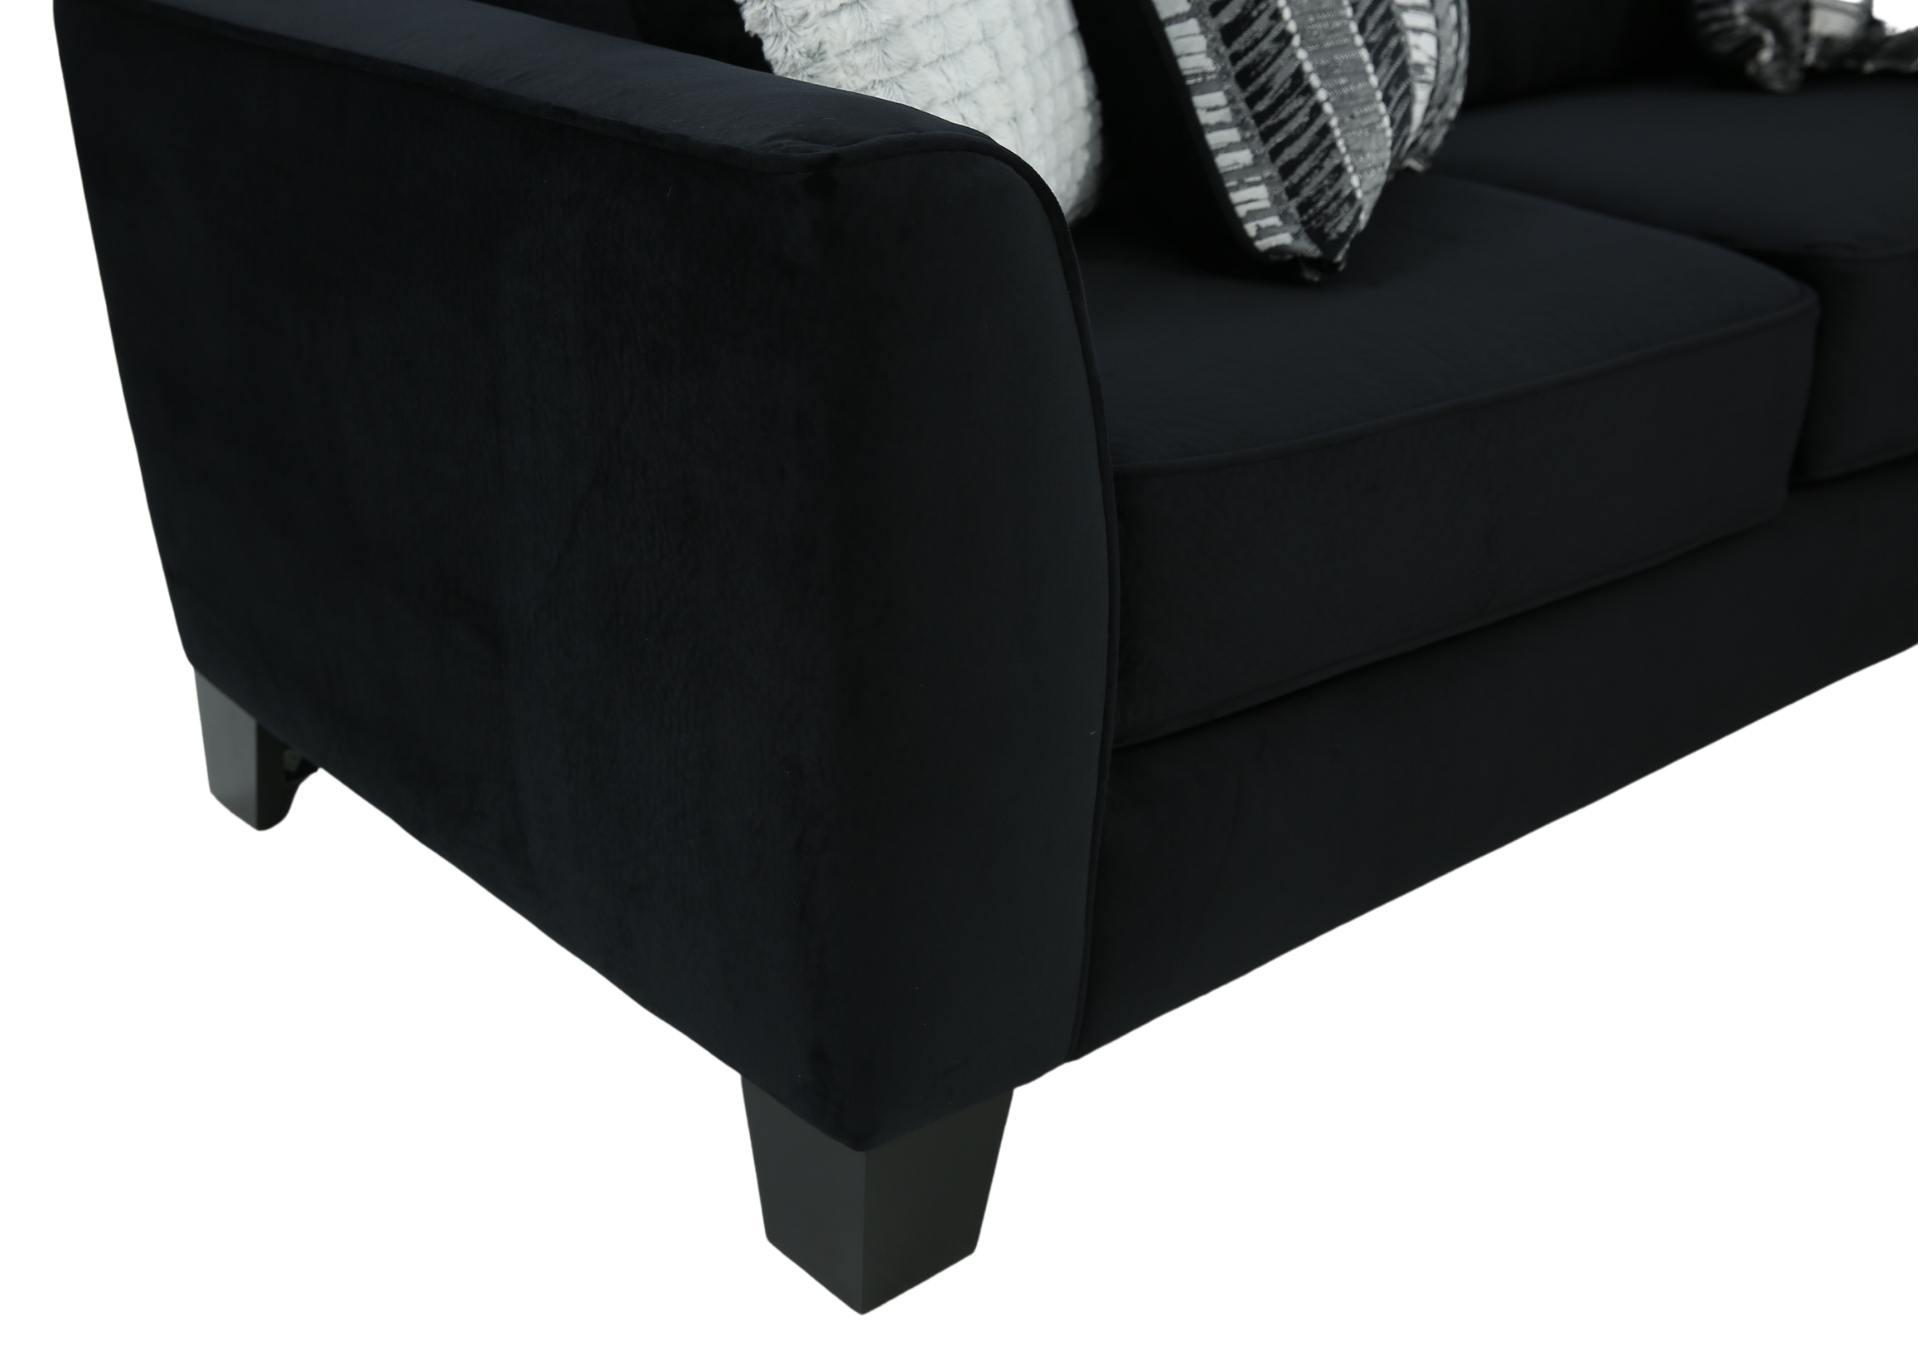 GROOVY BLACK 2 PIECE SECTIONAL,ALBANY INDUSTRIES, INC.